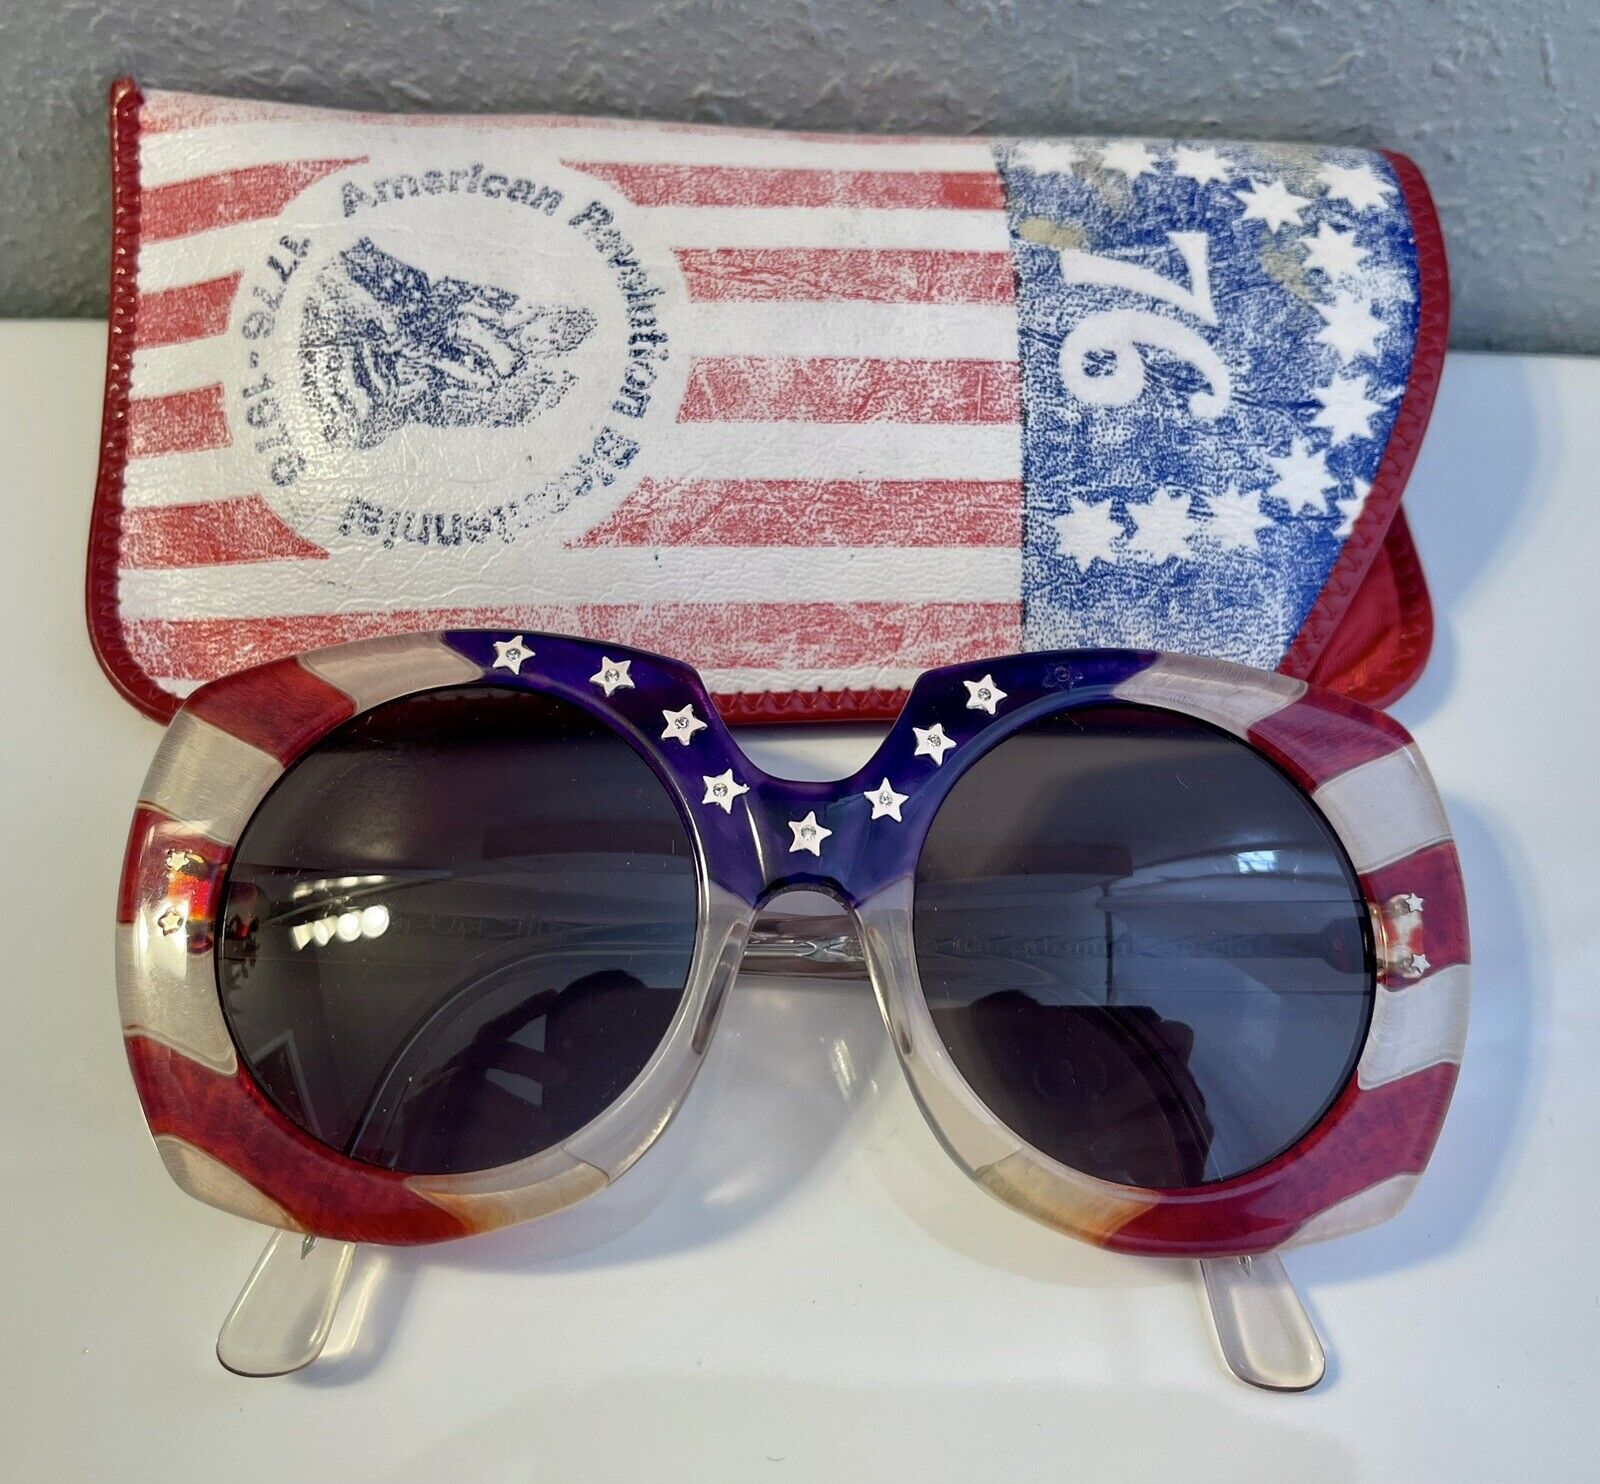 1976 Americana Bicentennial Red White Blue Vanity Optical Sunglasses w/ Pouch